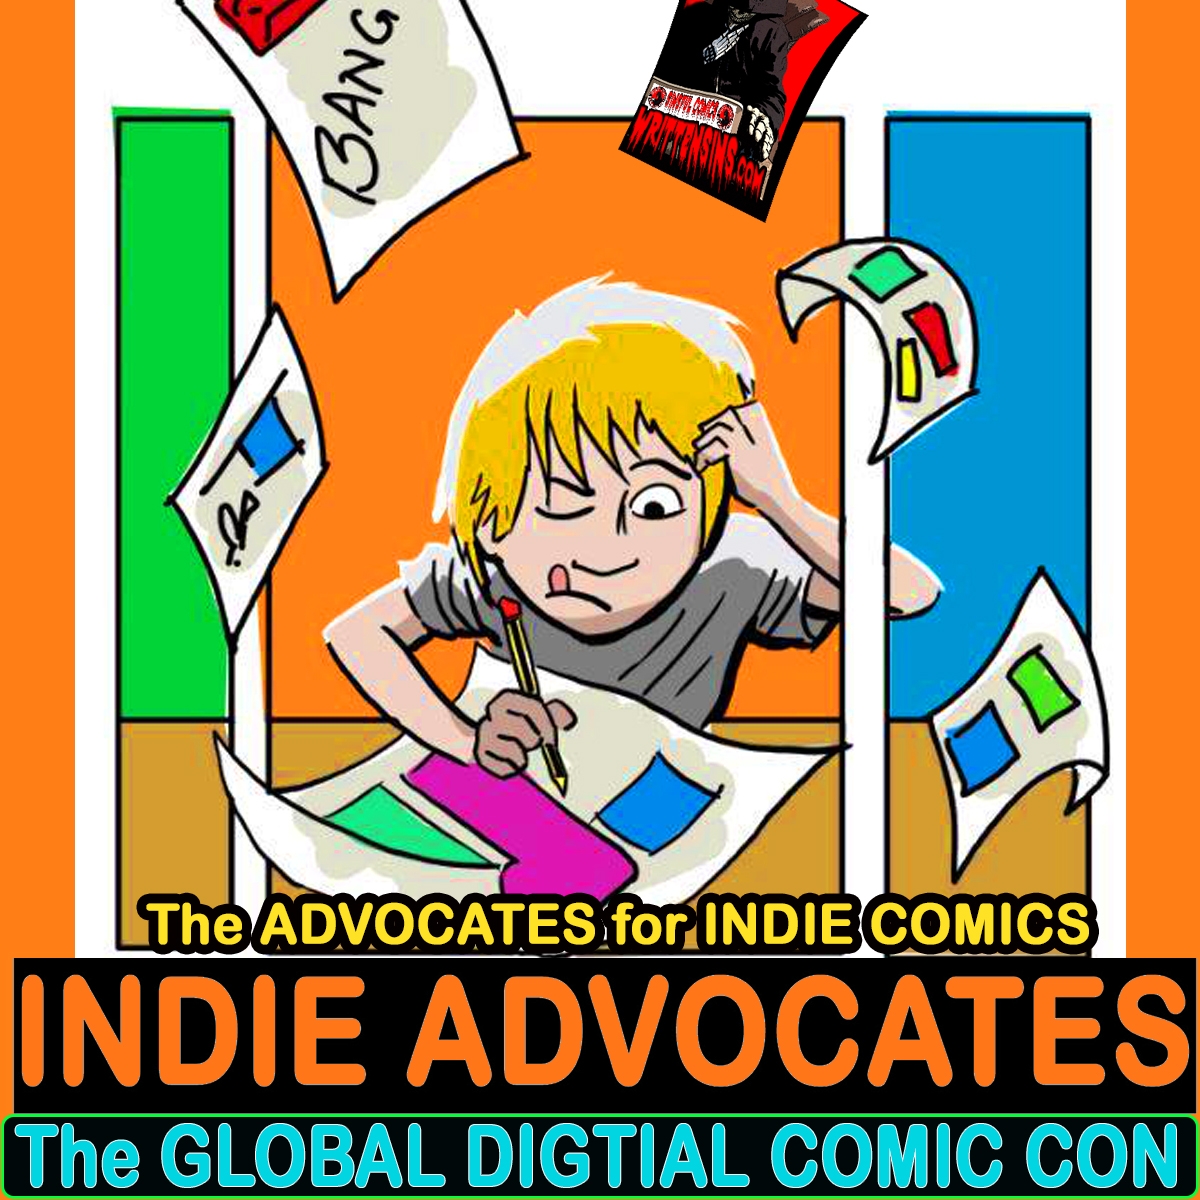 INDIE BANNERS Featuring The CREATORS of INDIE COMCIS and Their Infor